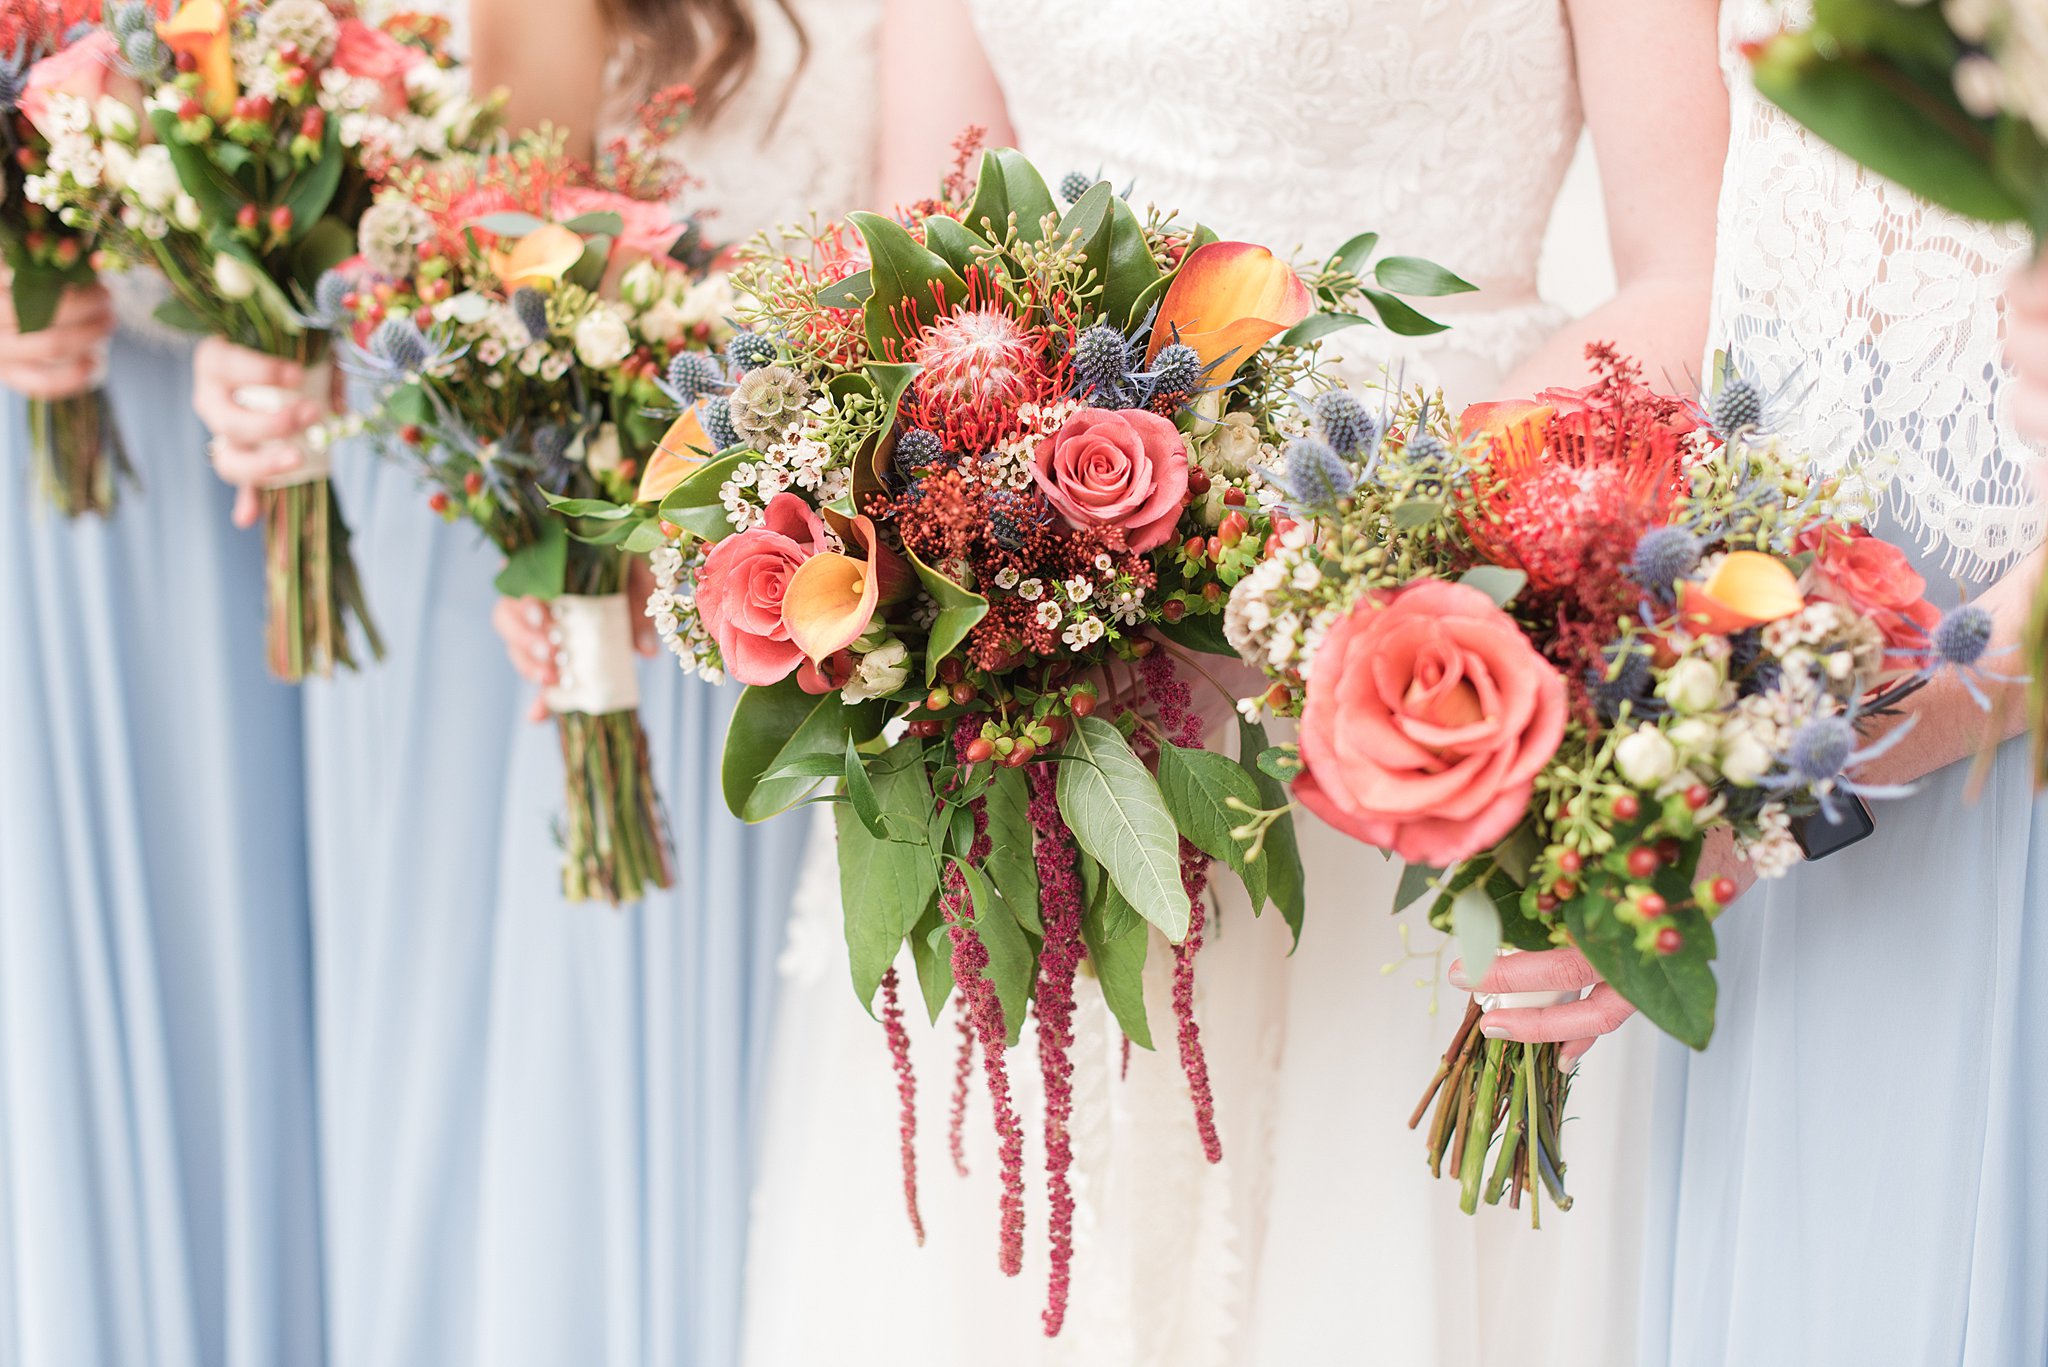 Details of a colorful and vibrant bridal bouquet with the bridesmaids at a Belmont Manor Wedding